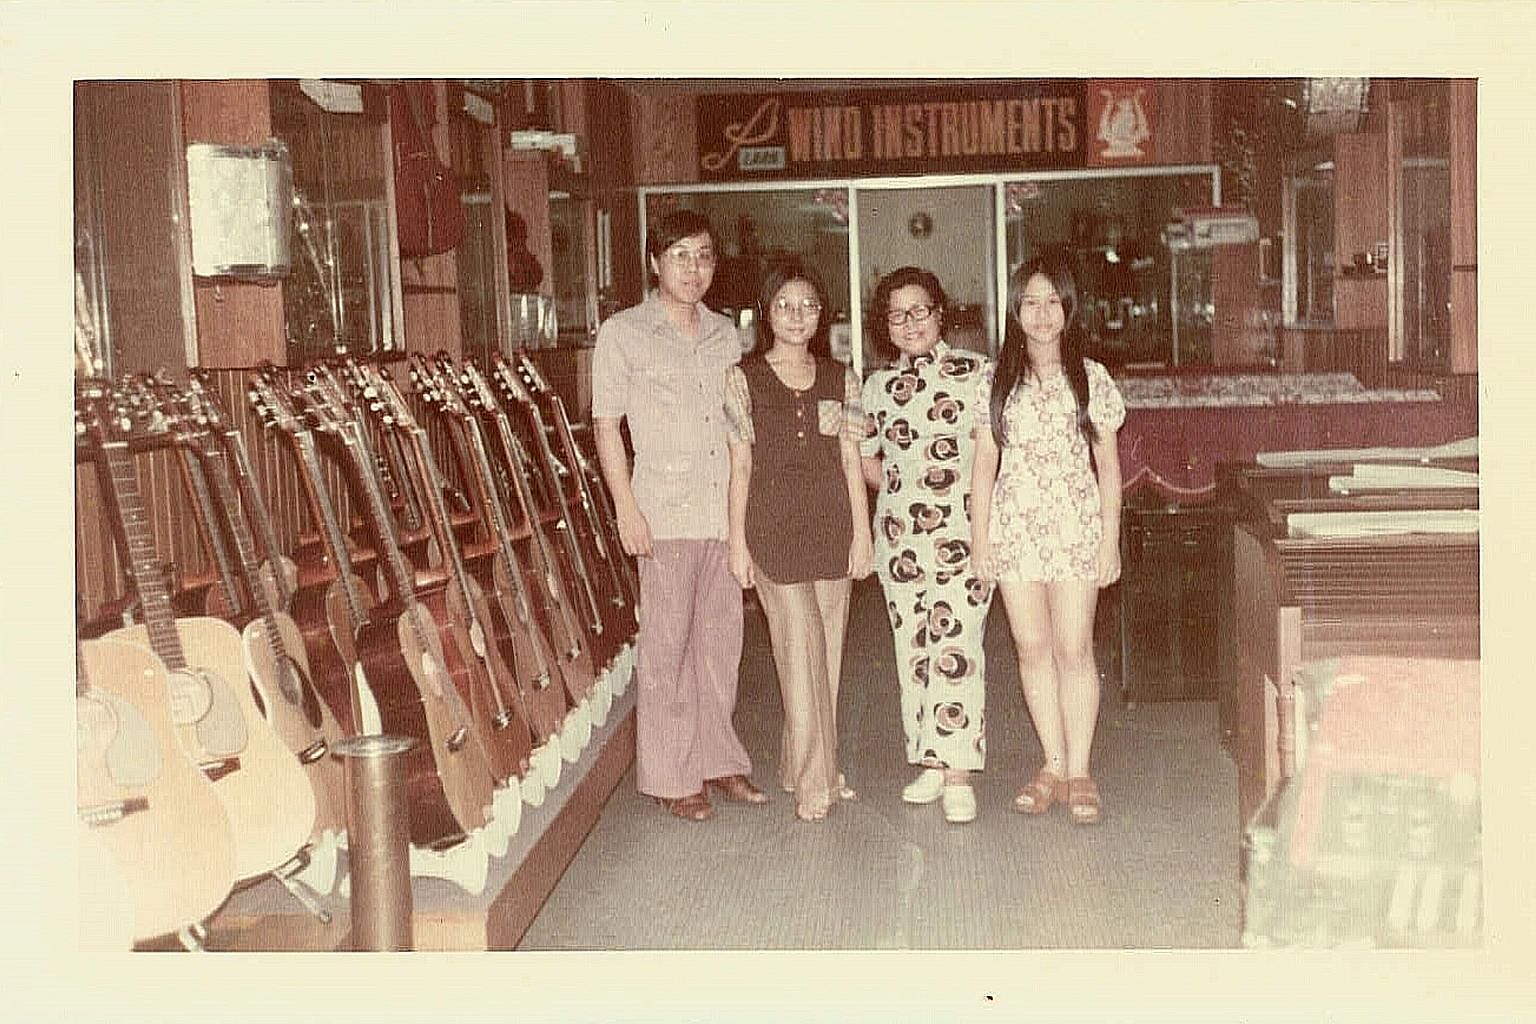 (From left) City Music founder Willy Hoe, his wife, Shirley, Mr Hoe's mother and an unidentified woman at their original store at Bras Basah.